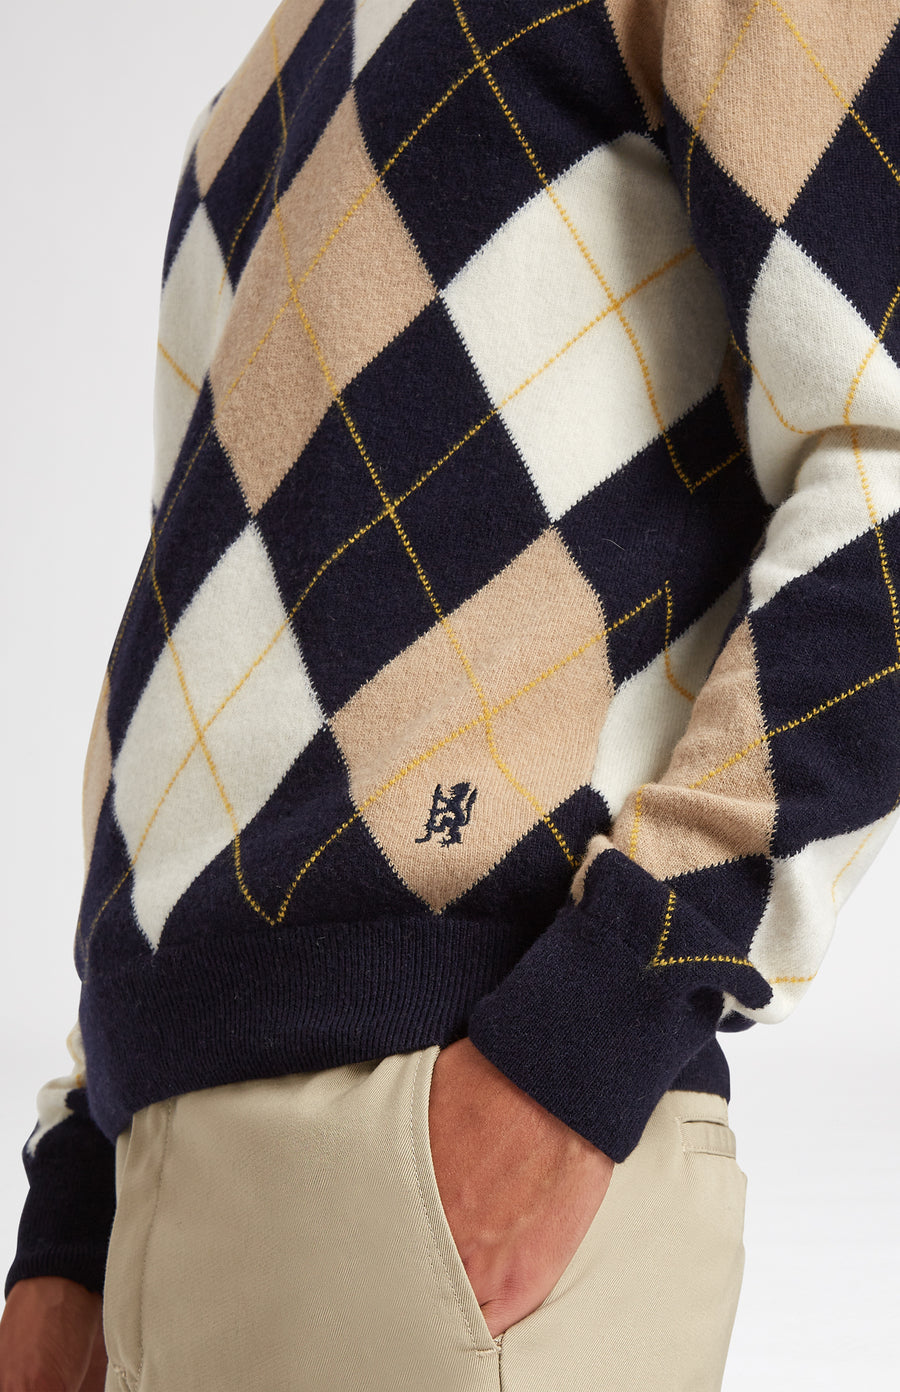 Heritage argyle golf jumper in Navy and Camel embroidery detail - Pringle of Scotland 